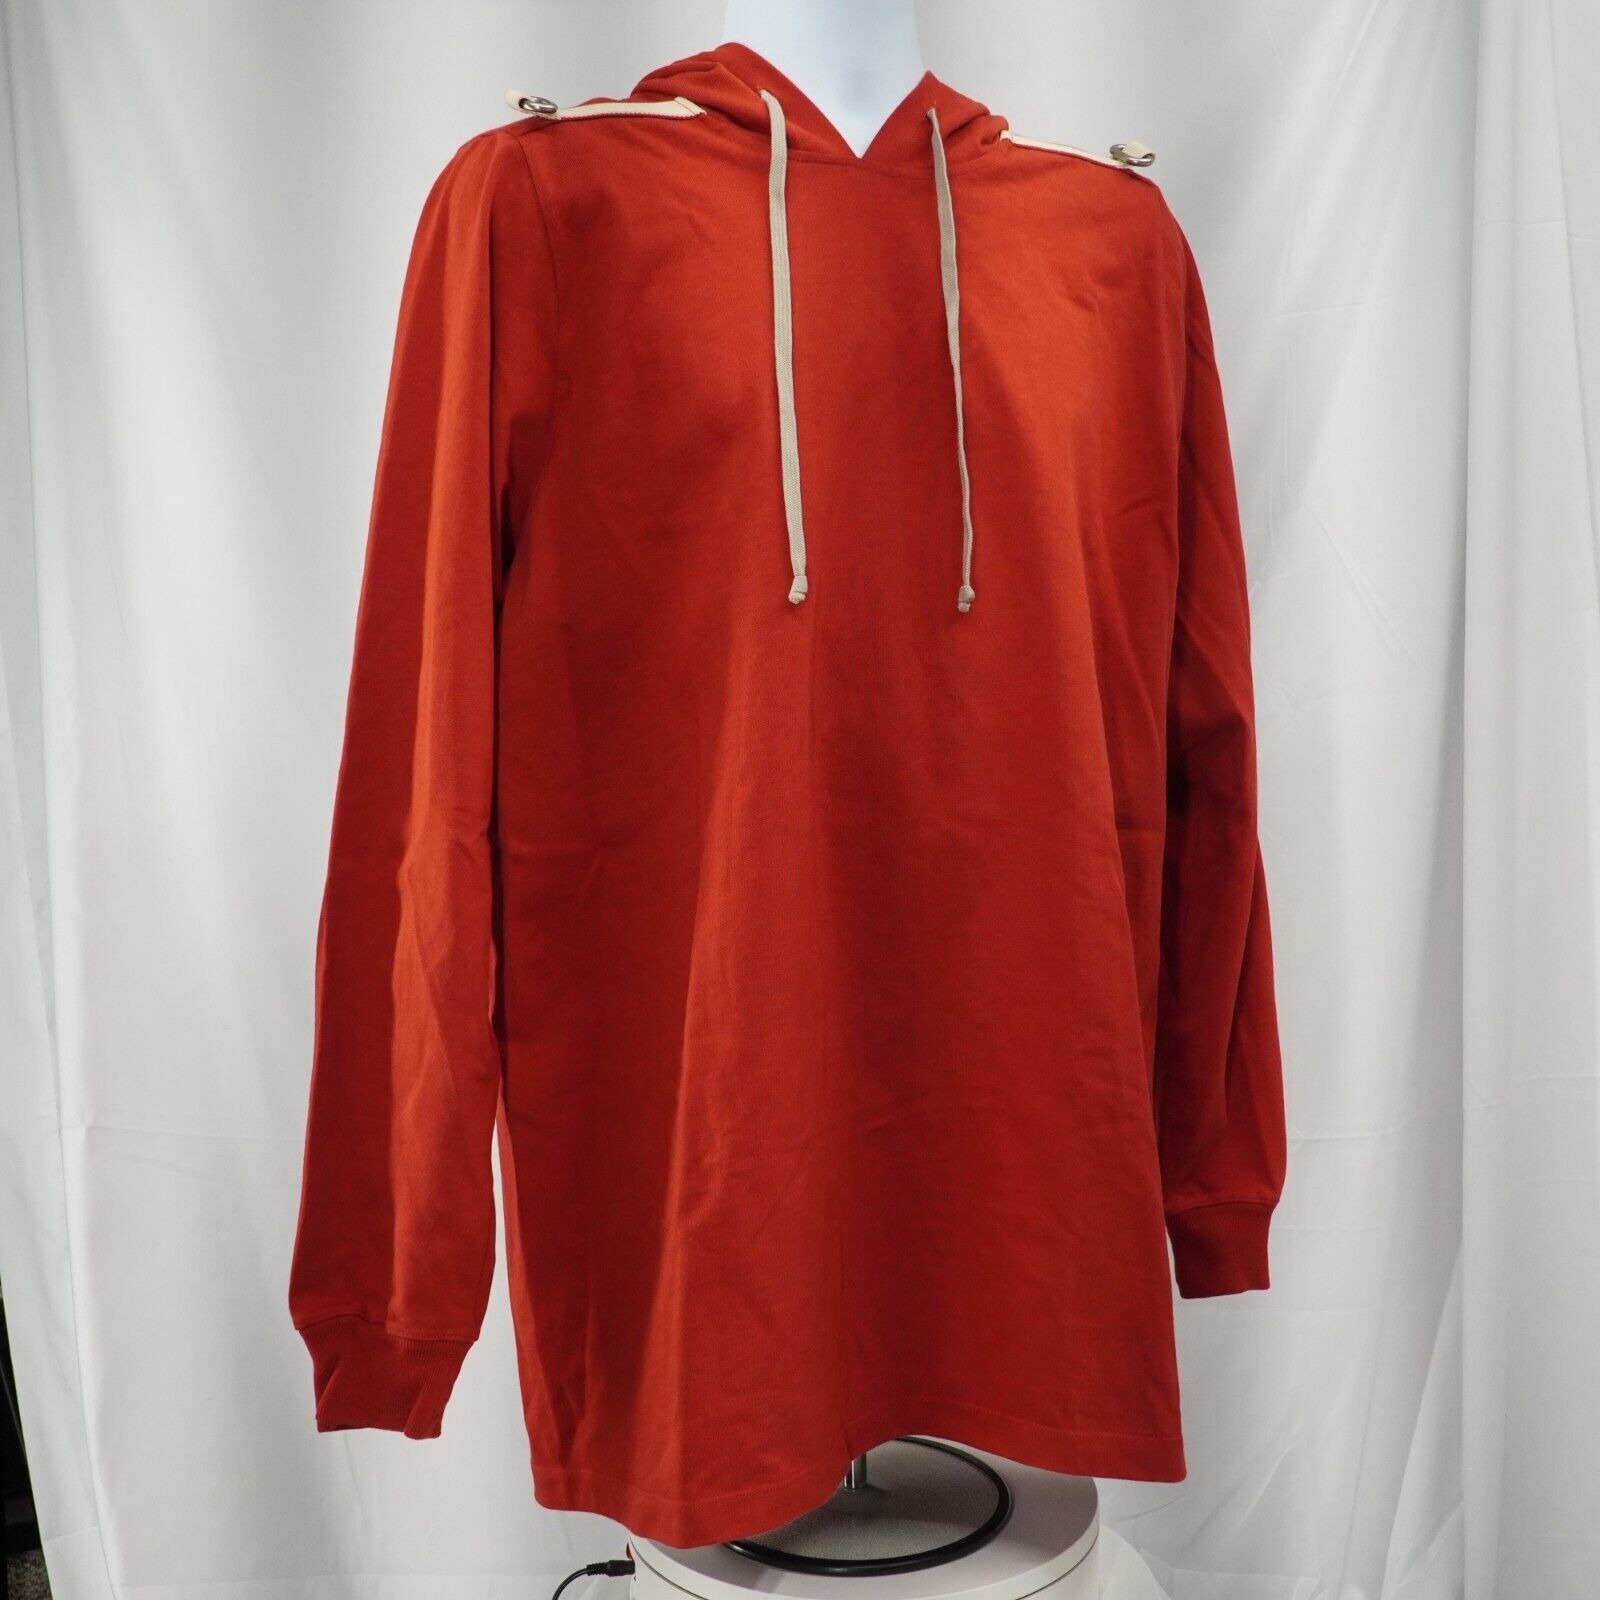 Knit Hoodie Sweater Longline Cardinal Red Natural D Rings - 18